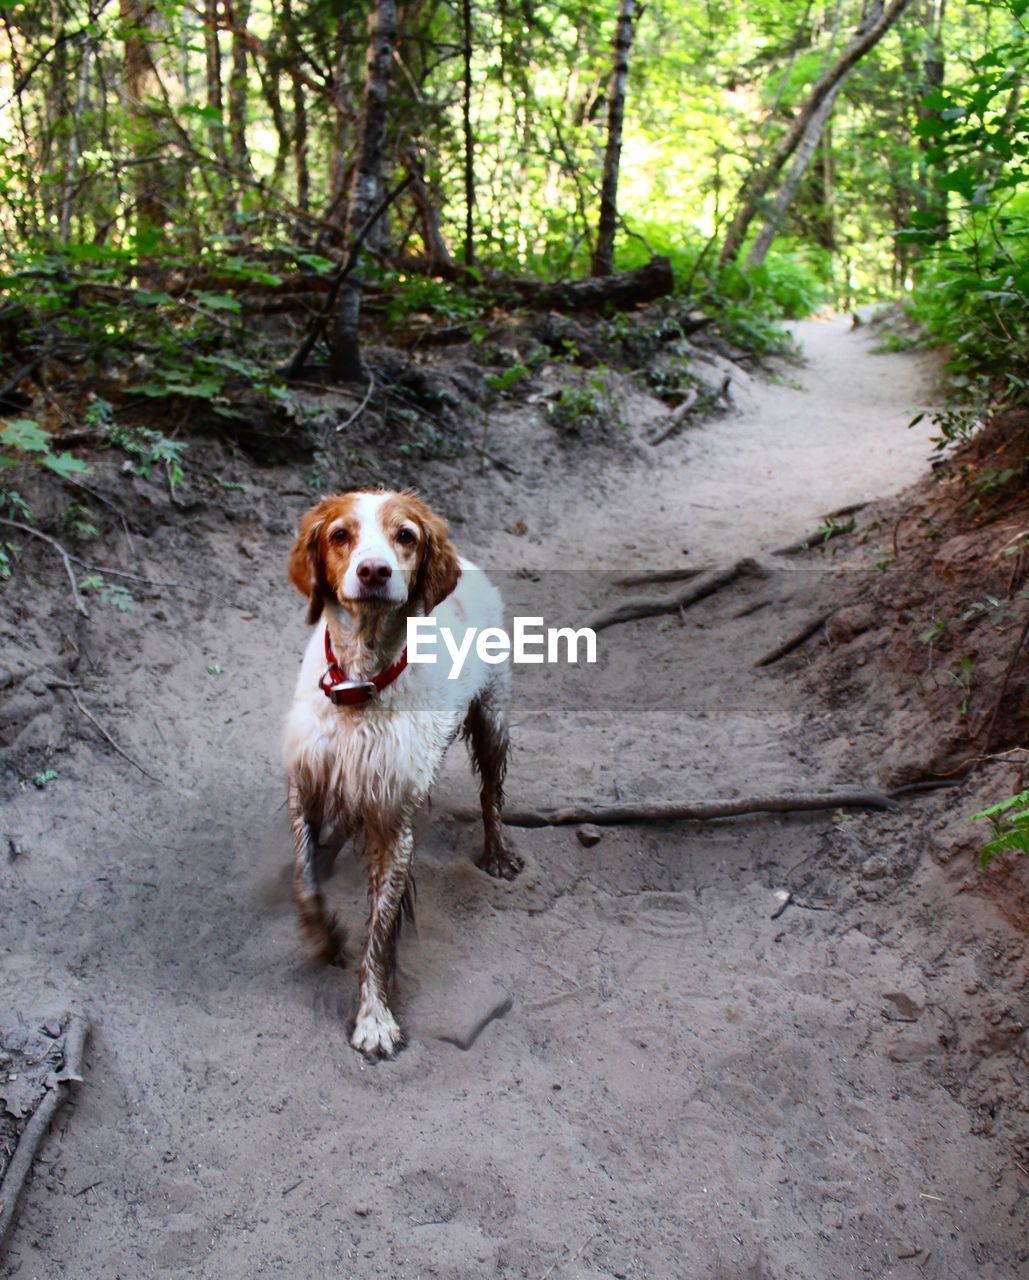 PORTRAIT OF DOG STANDING ON FOOTPATH IN FOREST